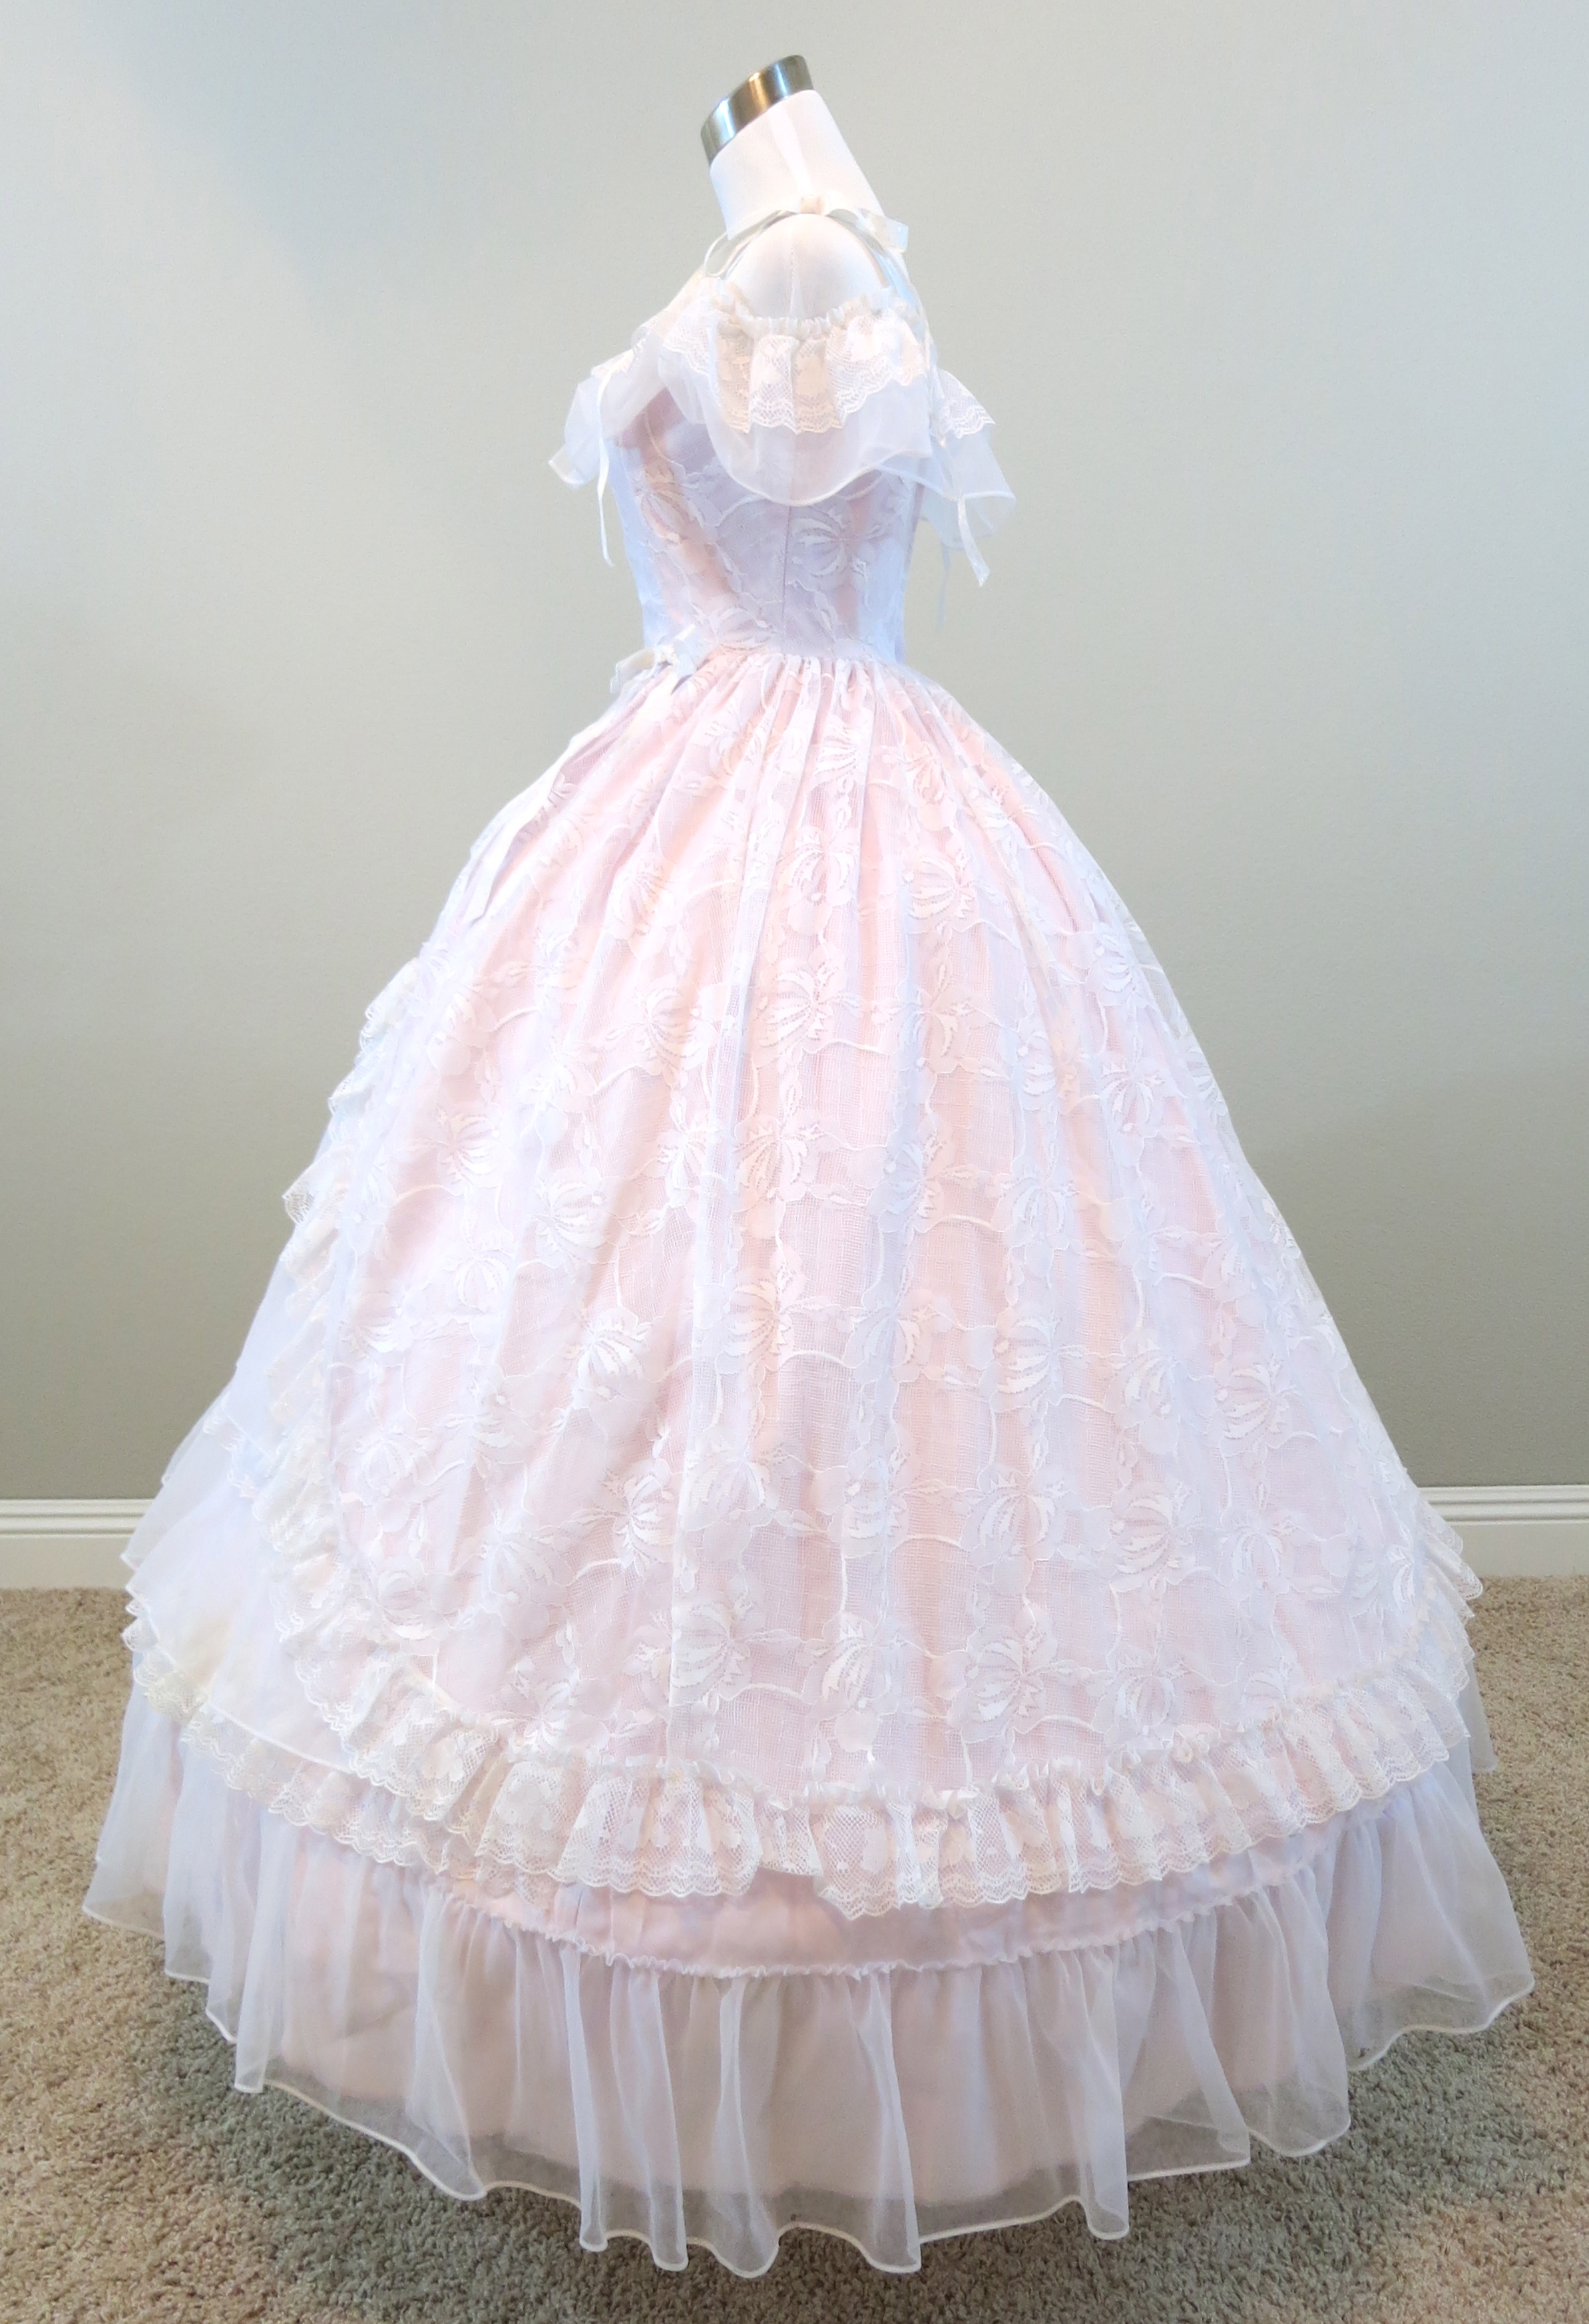 Pink & White Lace Gown — Civil War Ball Gowns & Costume